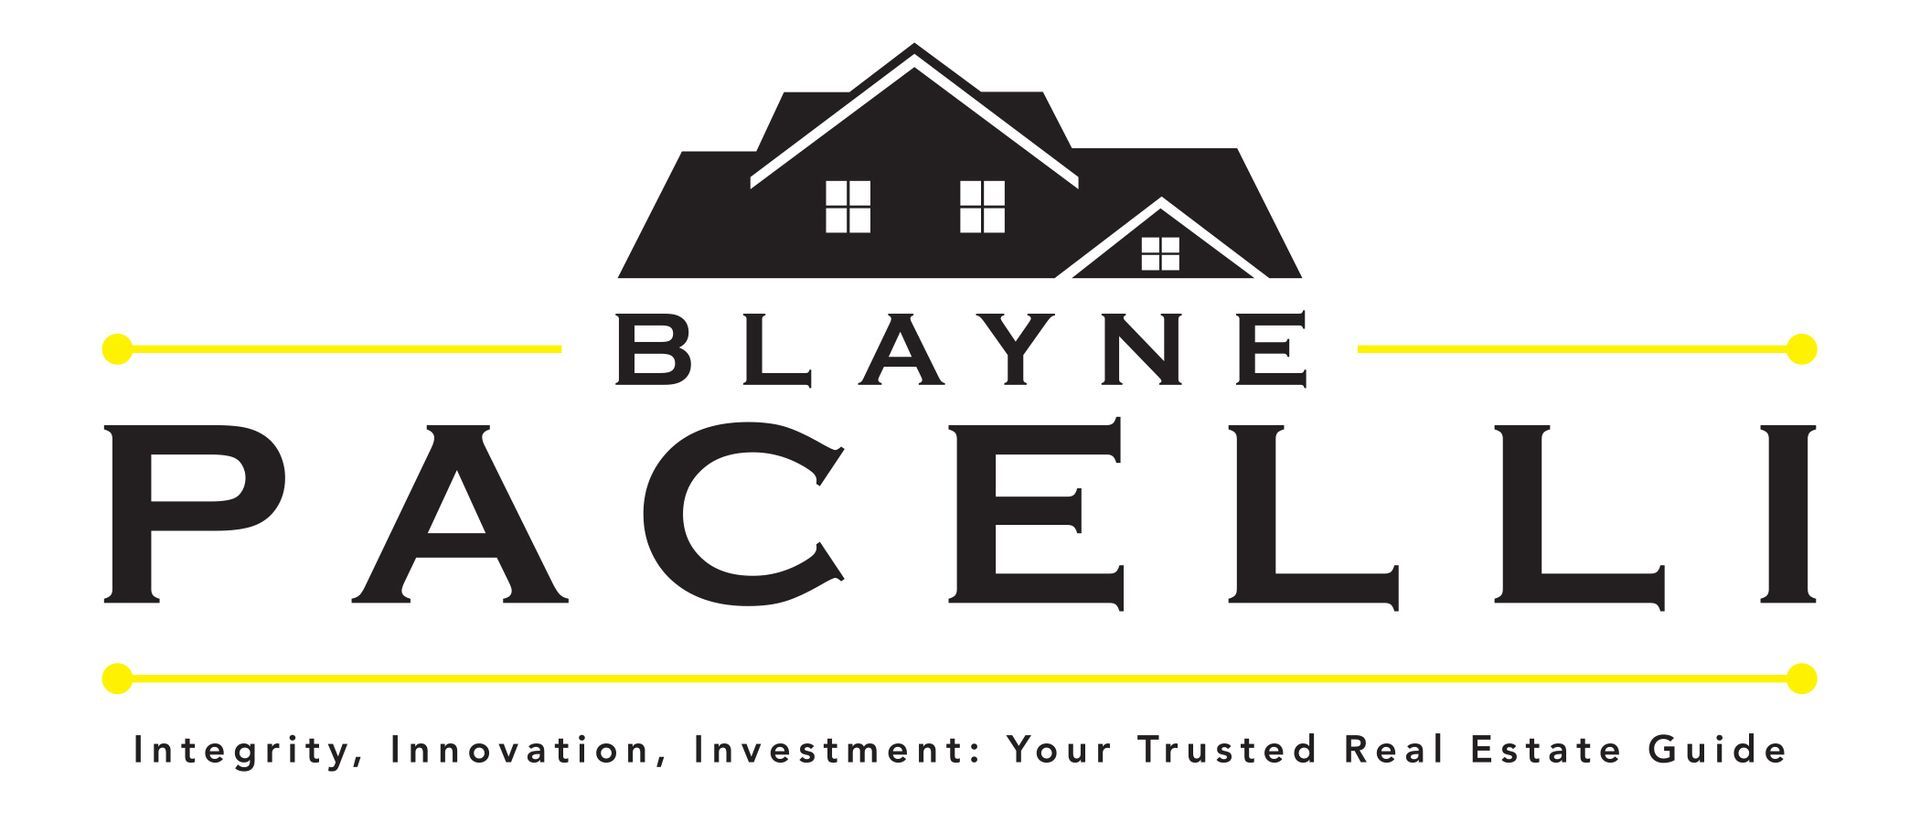 1 Realtor for Los Angeles County l Blayne Pacelli Realtor